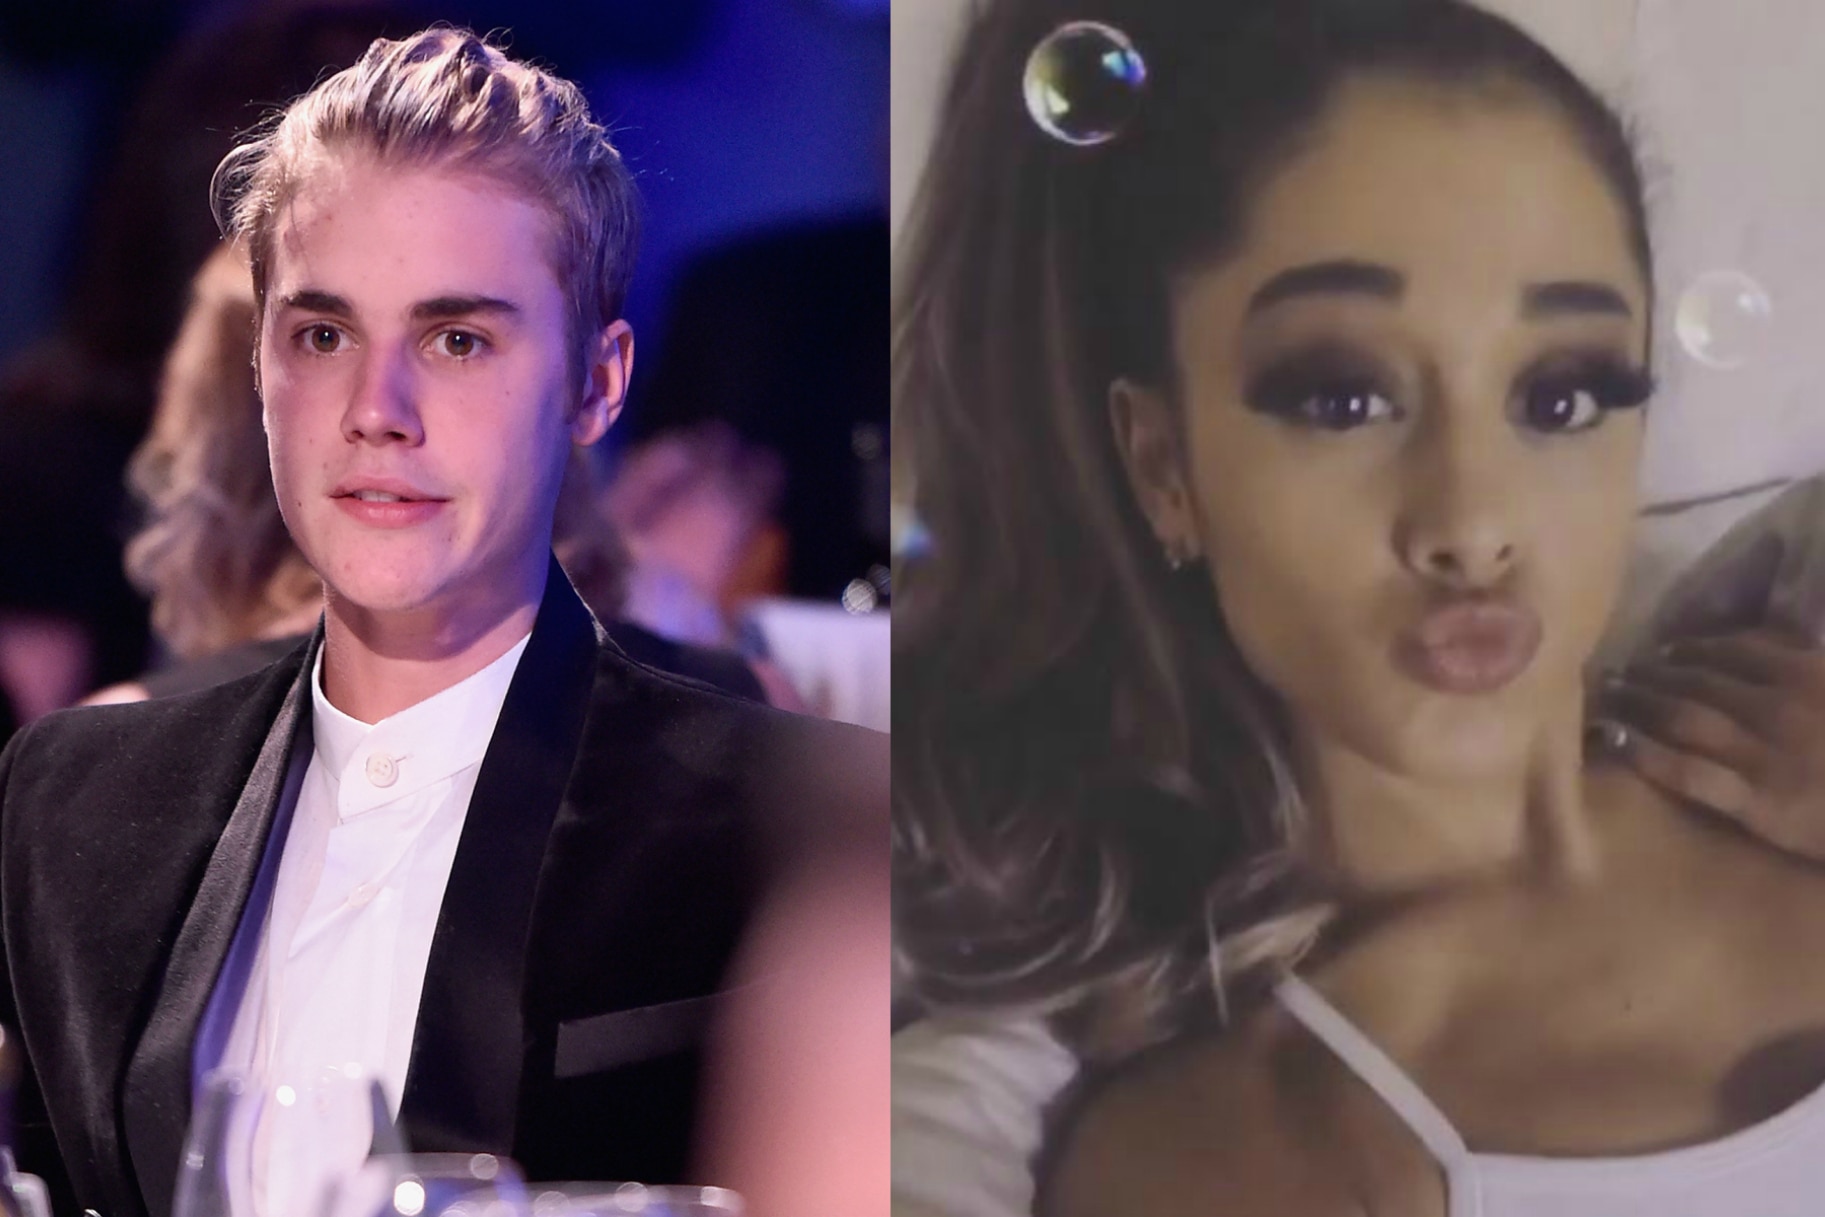 Justin Bieber Tried To Flirt With Ariana Grande On Instagram And It Was